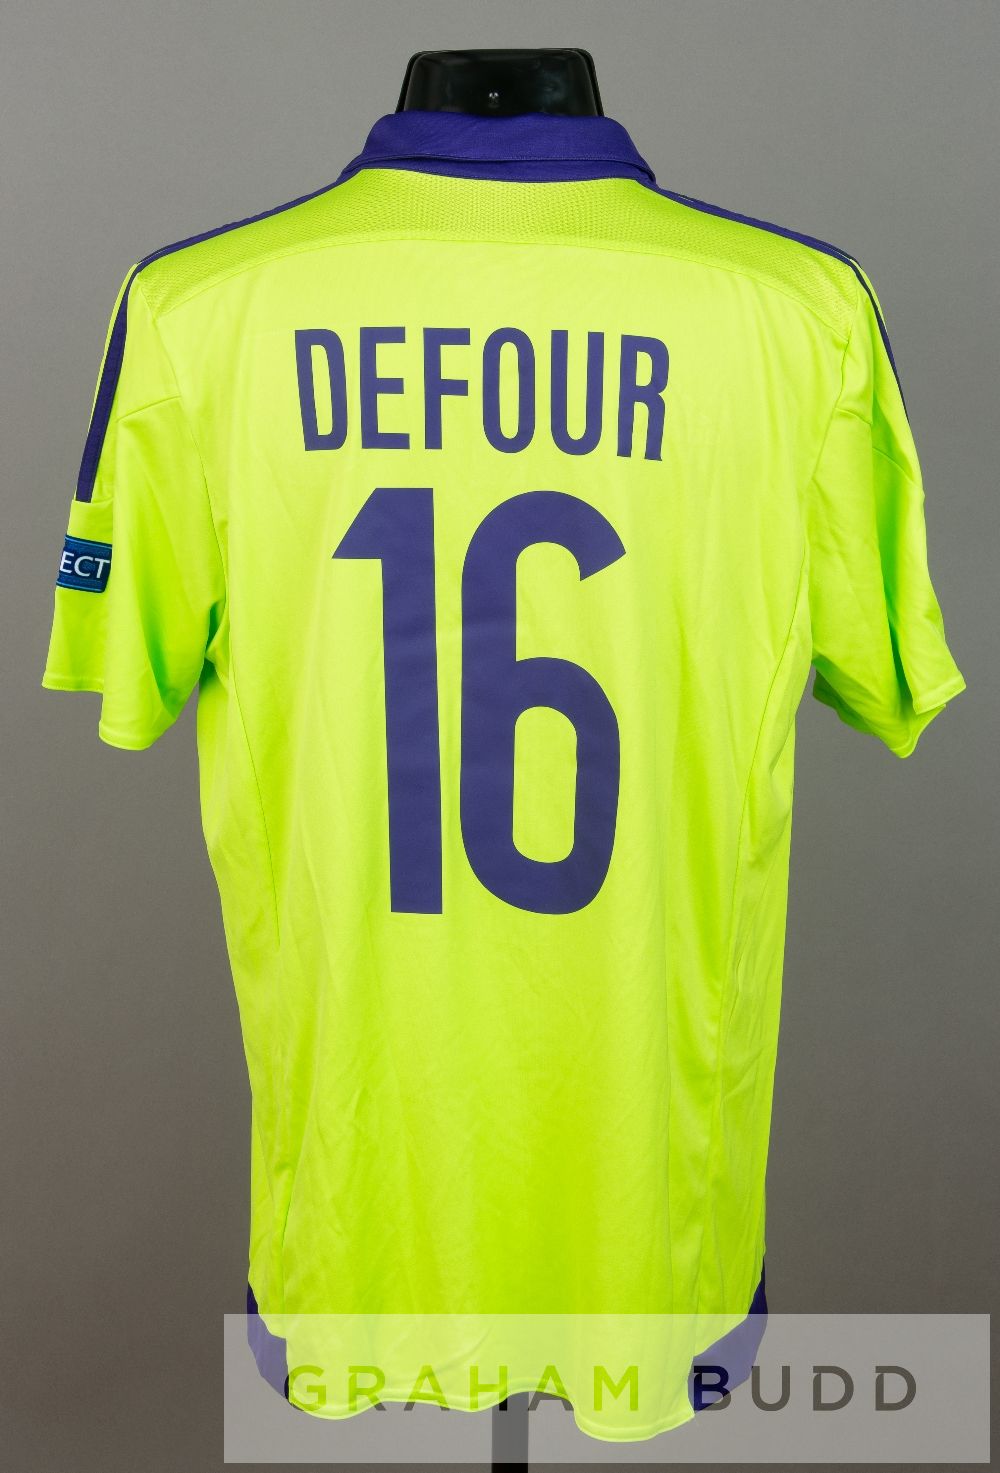 Defour lime green and purple Anderlecht no.16 jersey v Tottenham Hotspur in the UEFA Europa League - Image 2 of 2